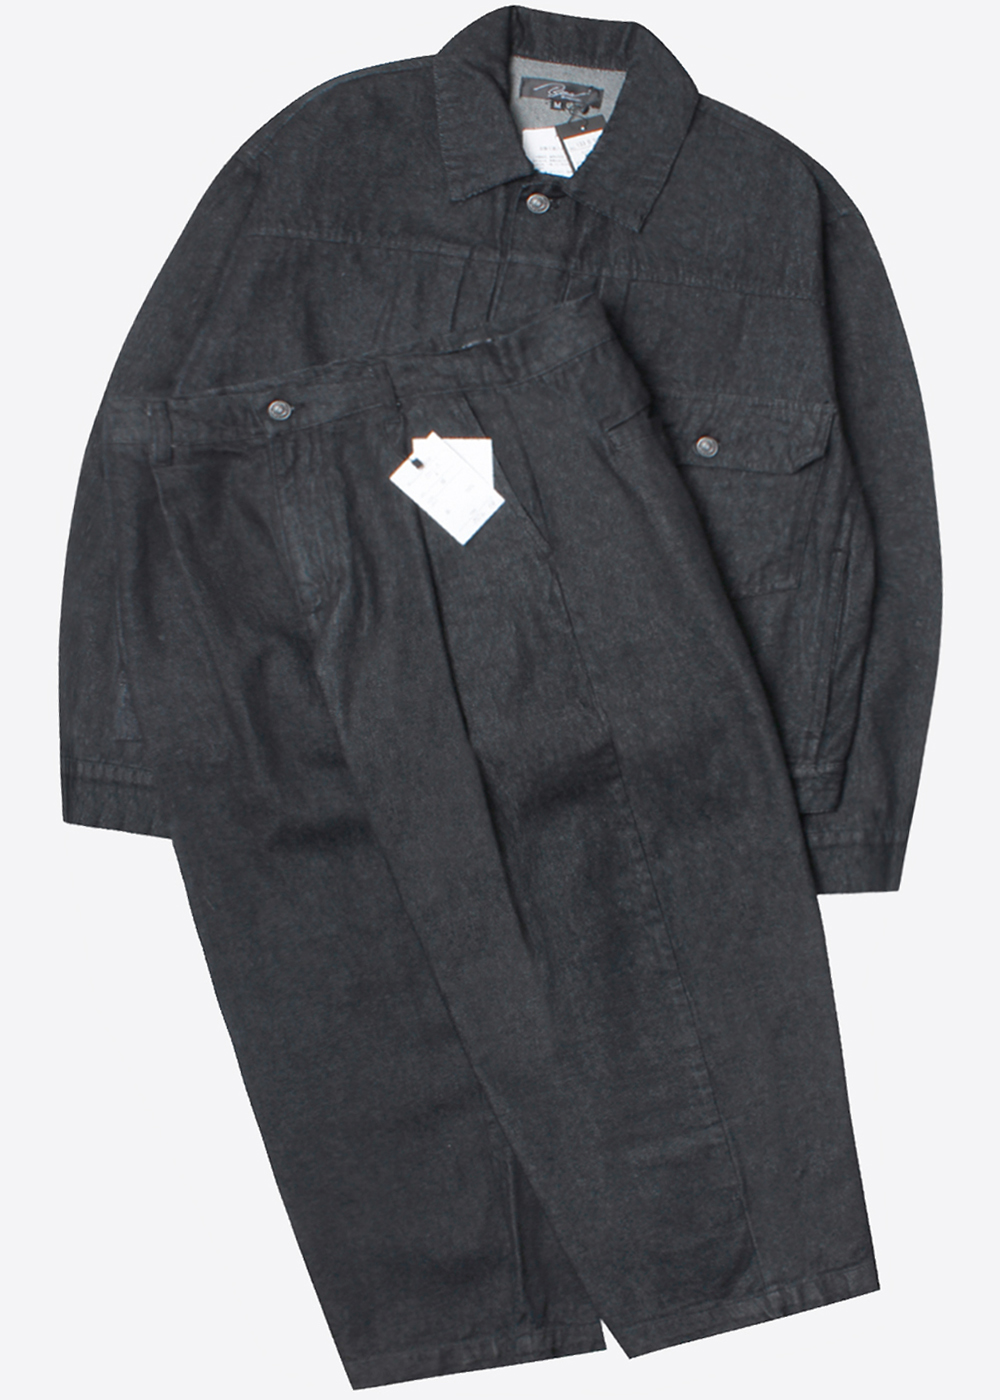 MINORITY’over fit’1st denim work two-piece jacket pant